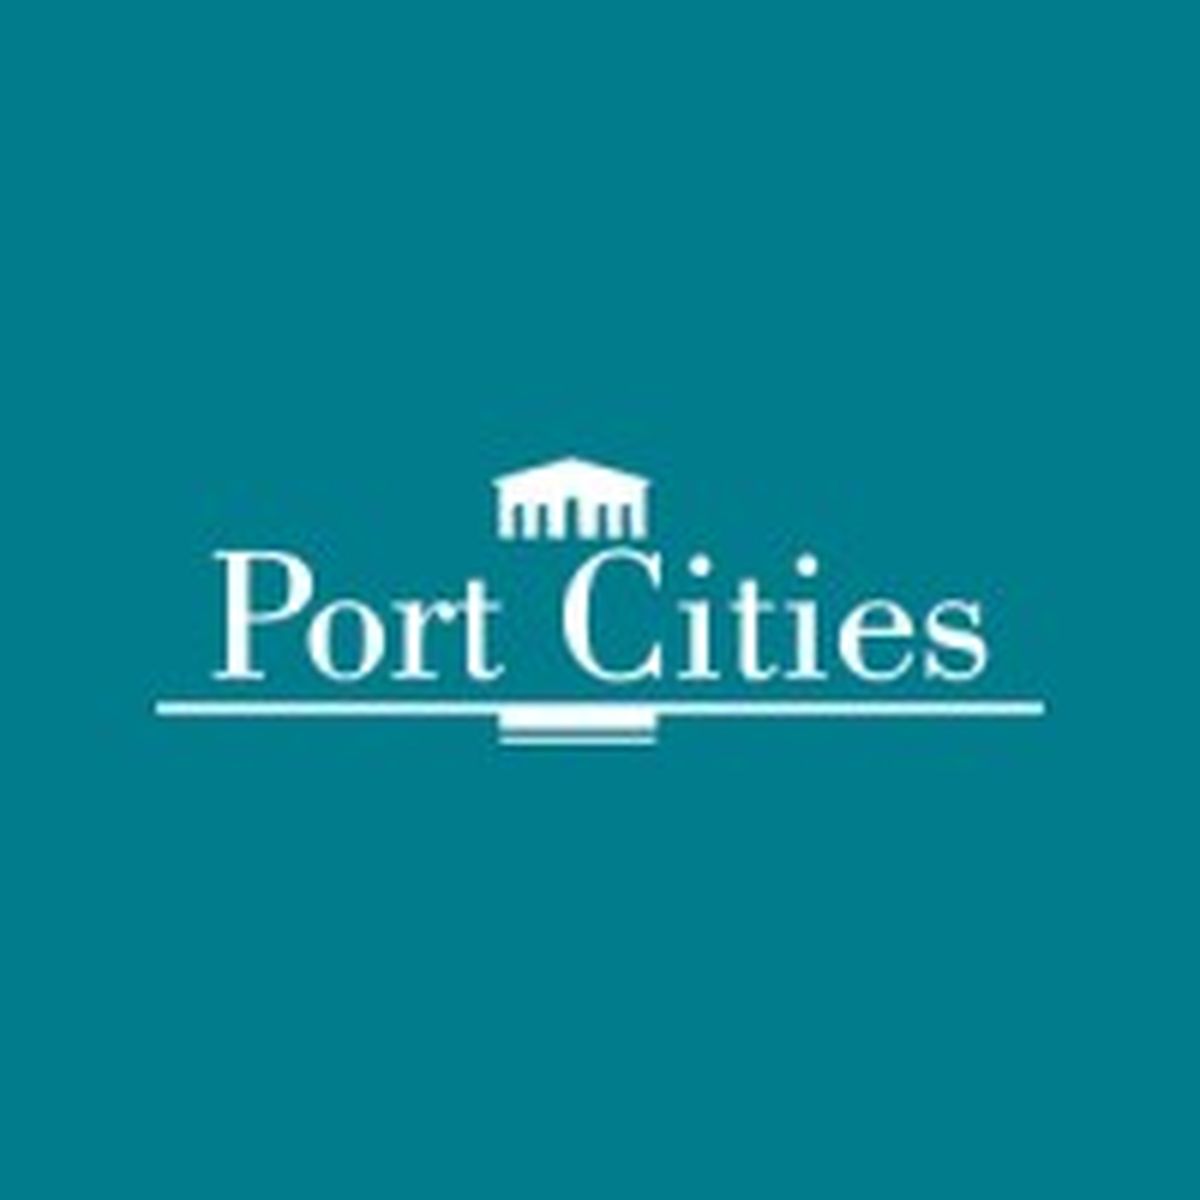 Business Analyst Vietnam Jobs at Port Cities, Ho Chi Minh City (Closed) | Glints